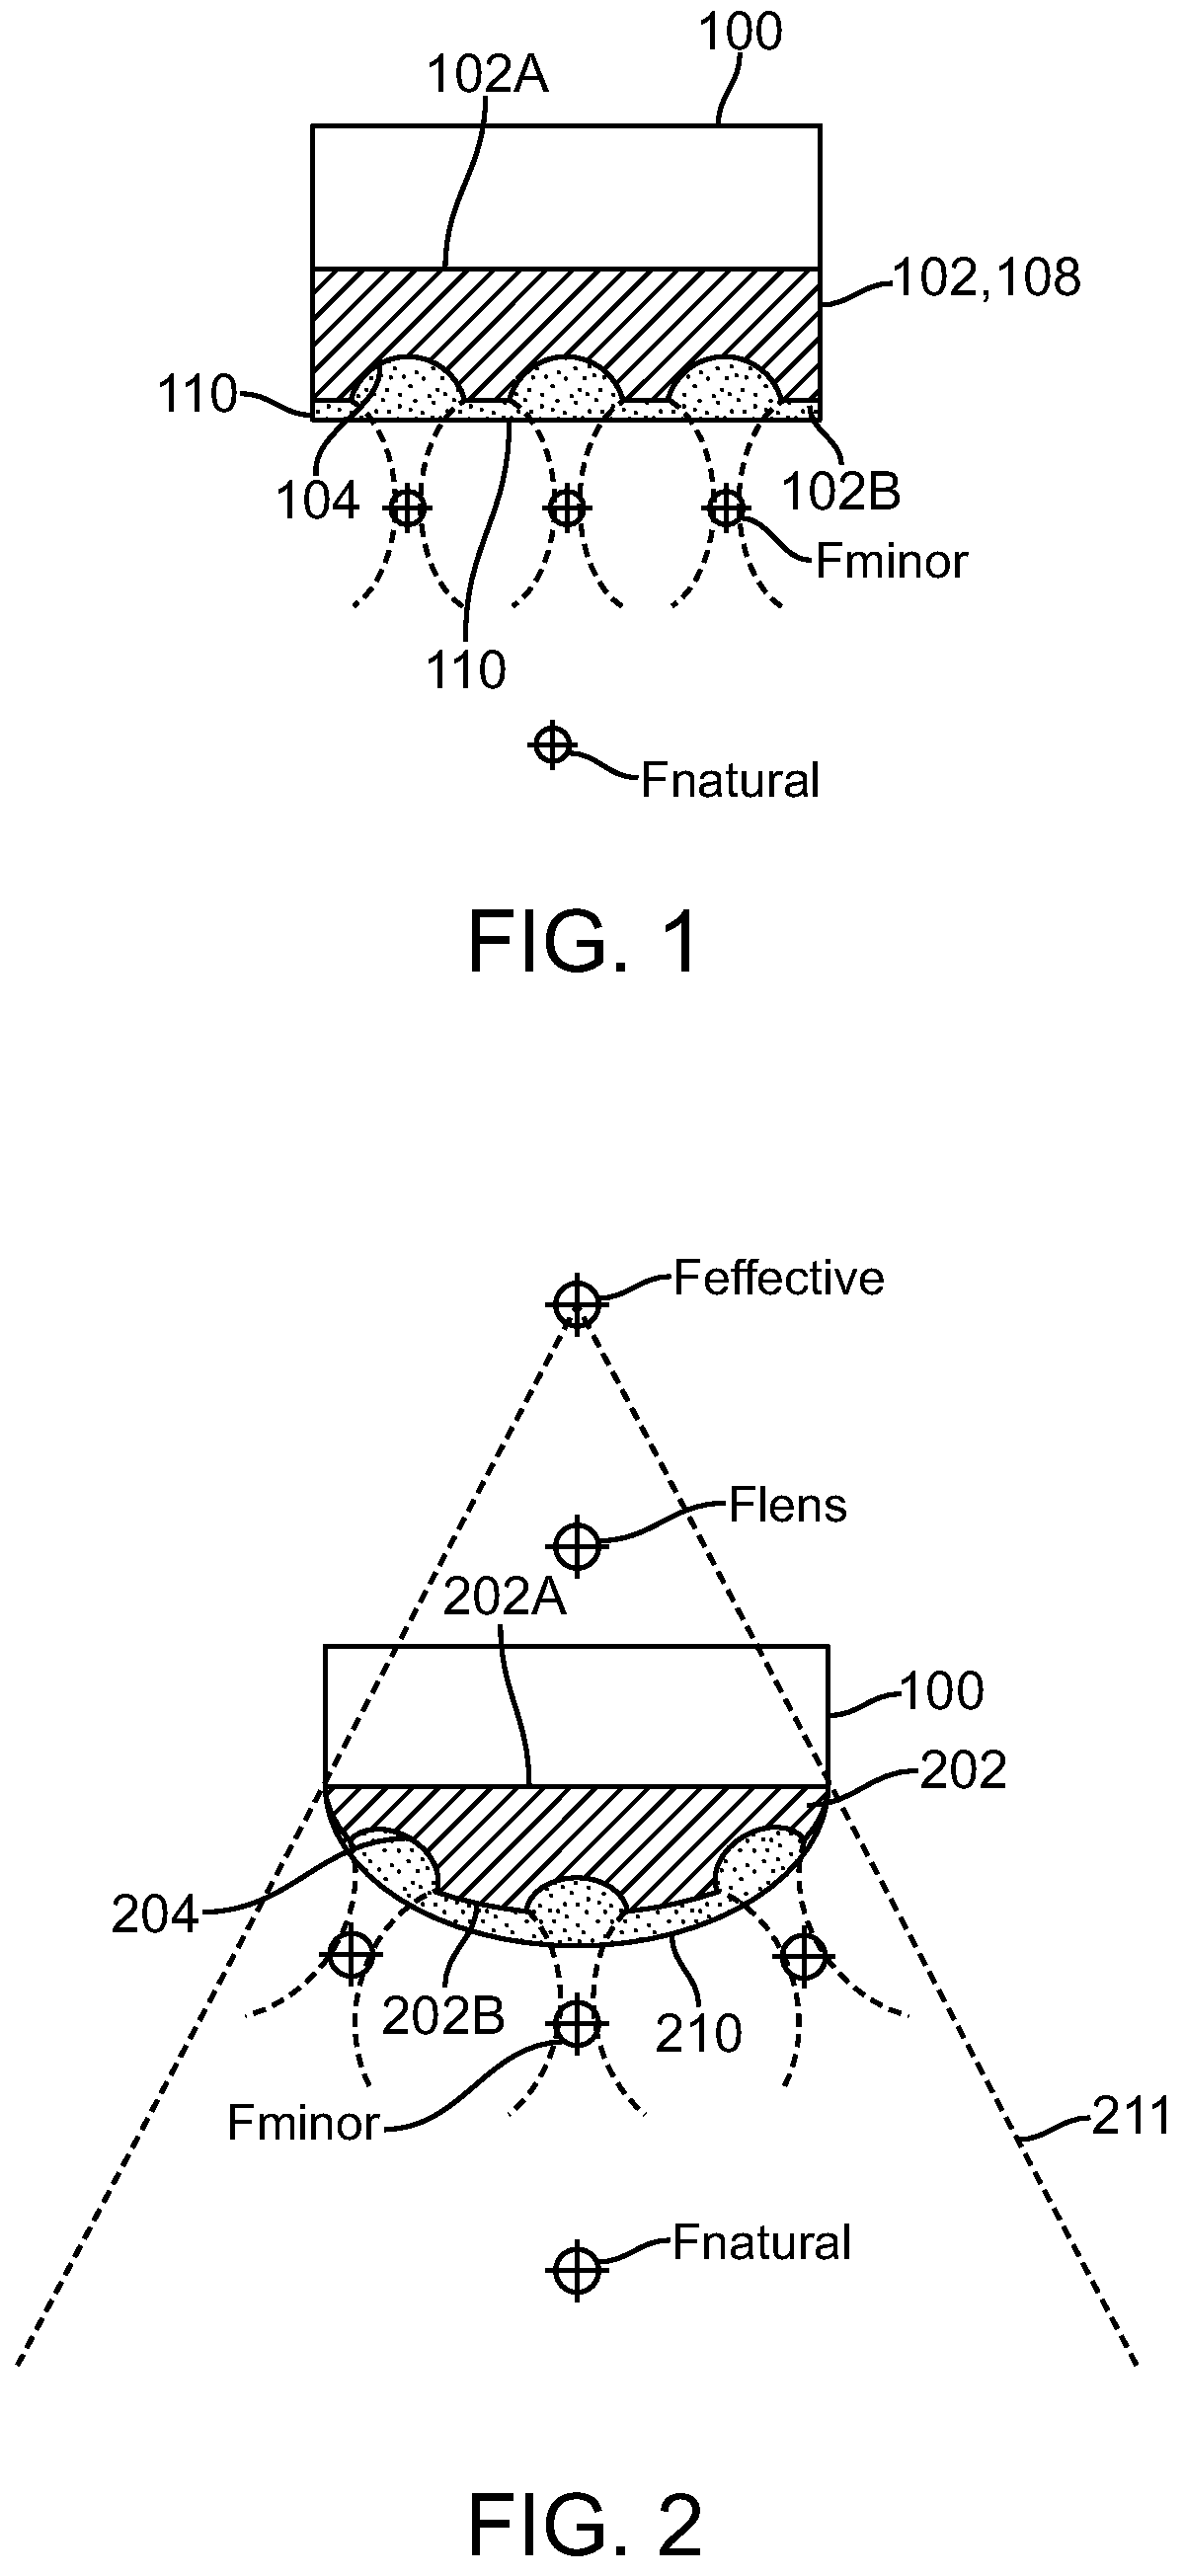 Ultrasound apparatus with treatment lens